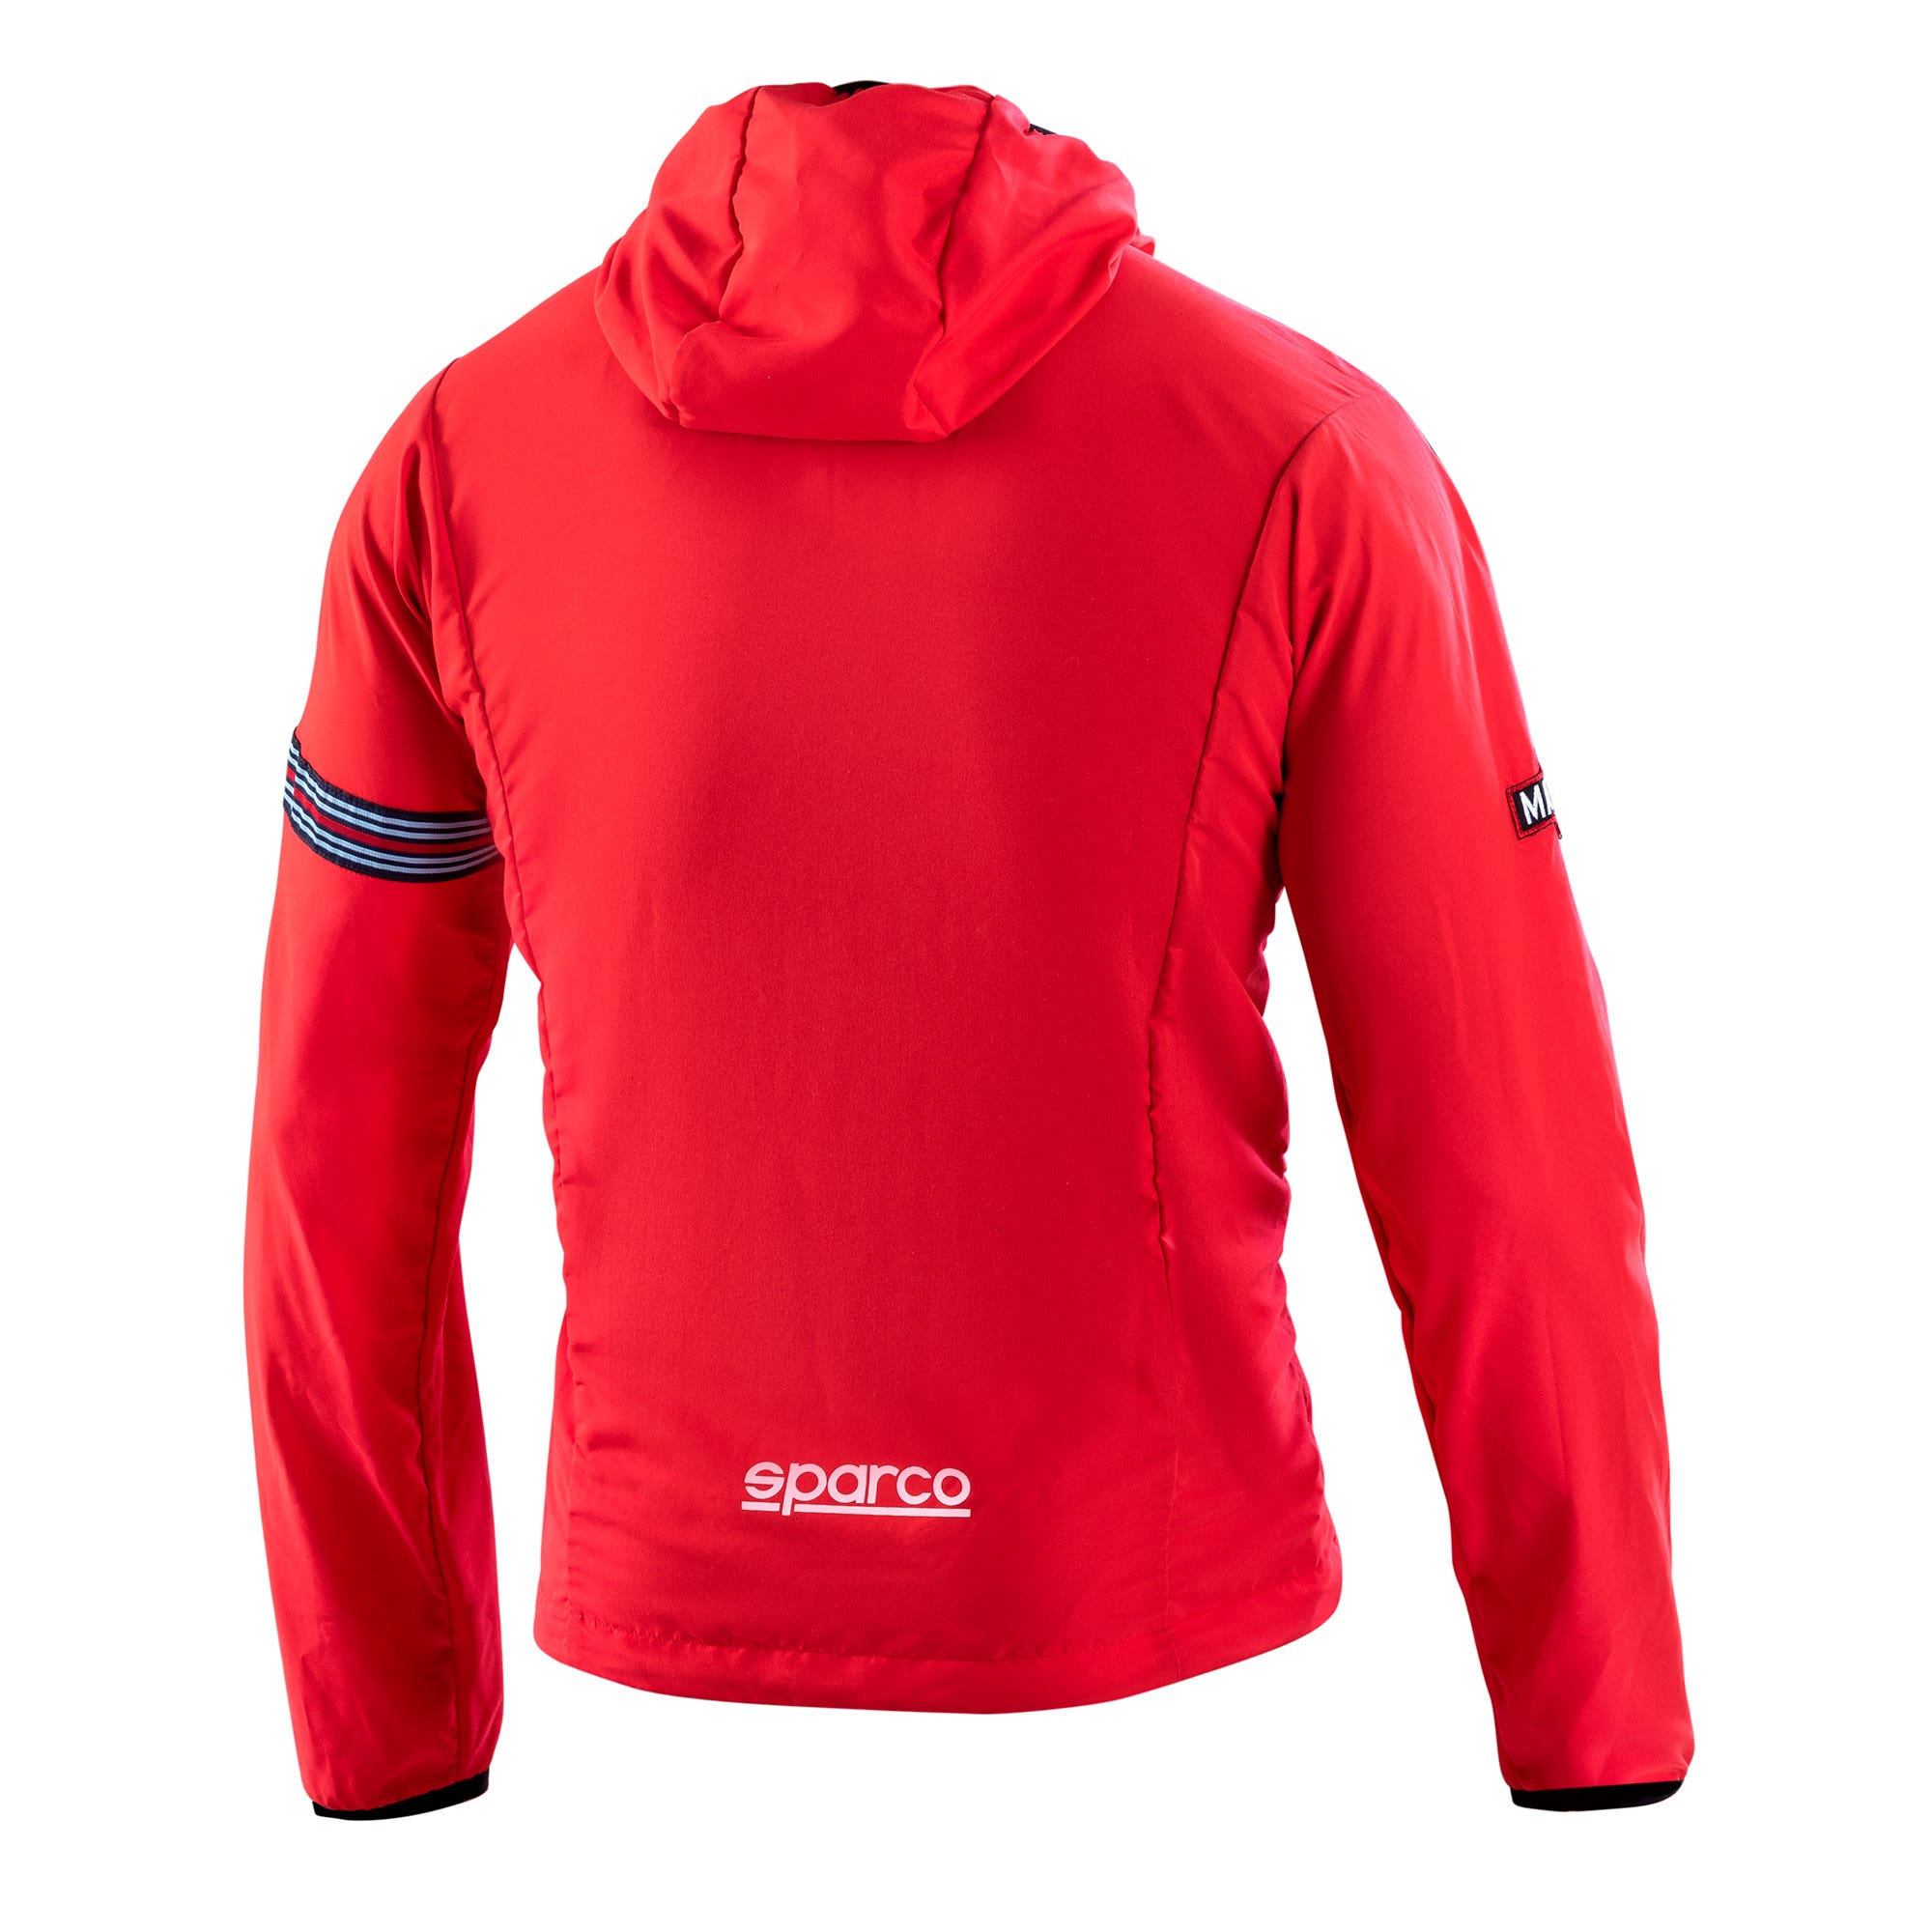 WINDSTOPPER MARTINI RACING - Sparco Shop